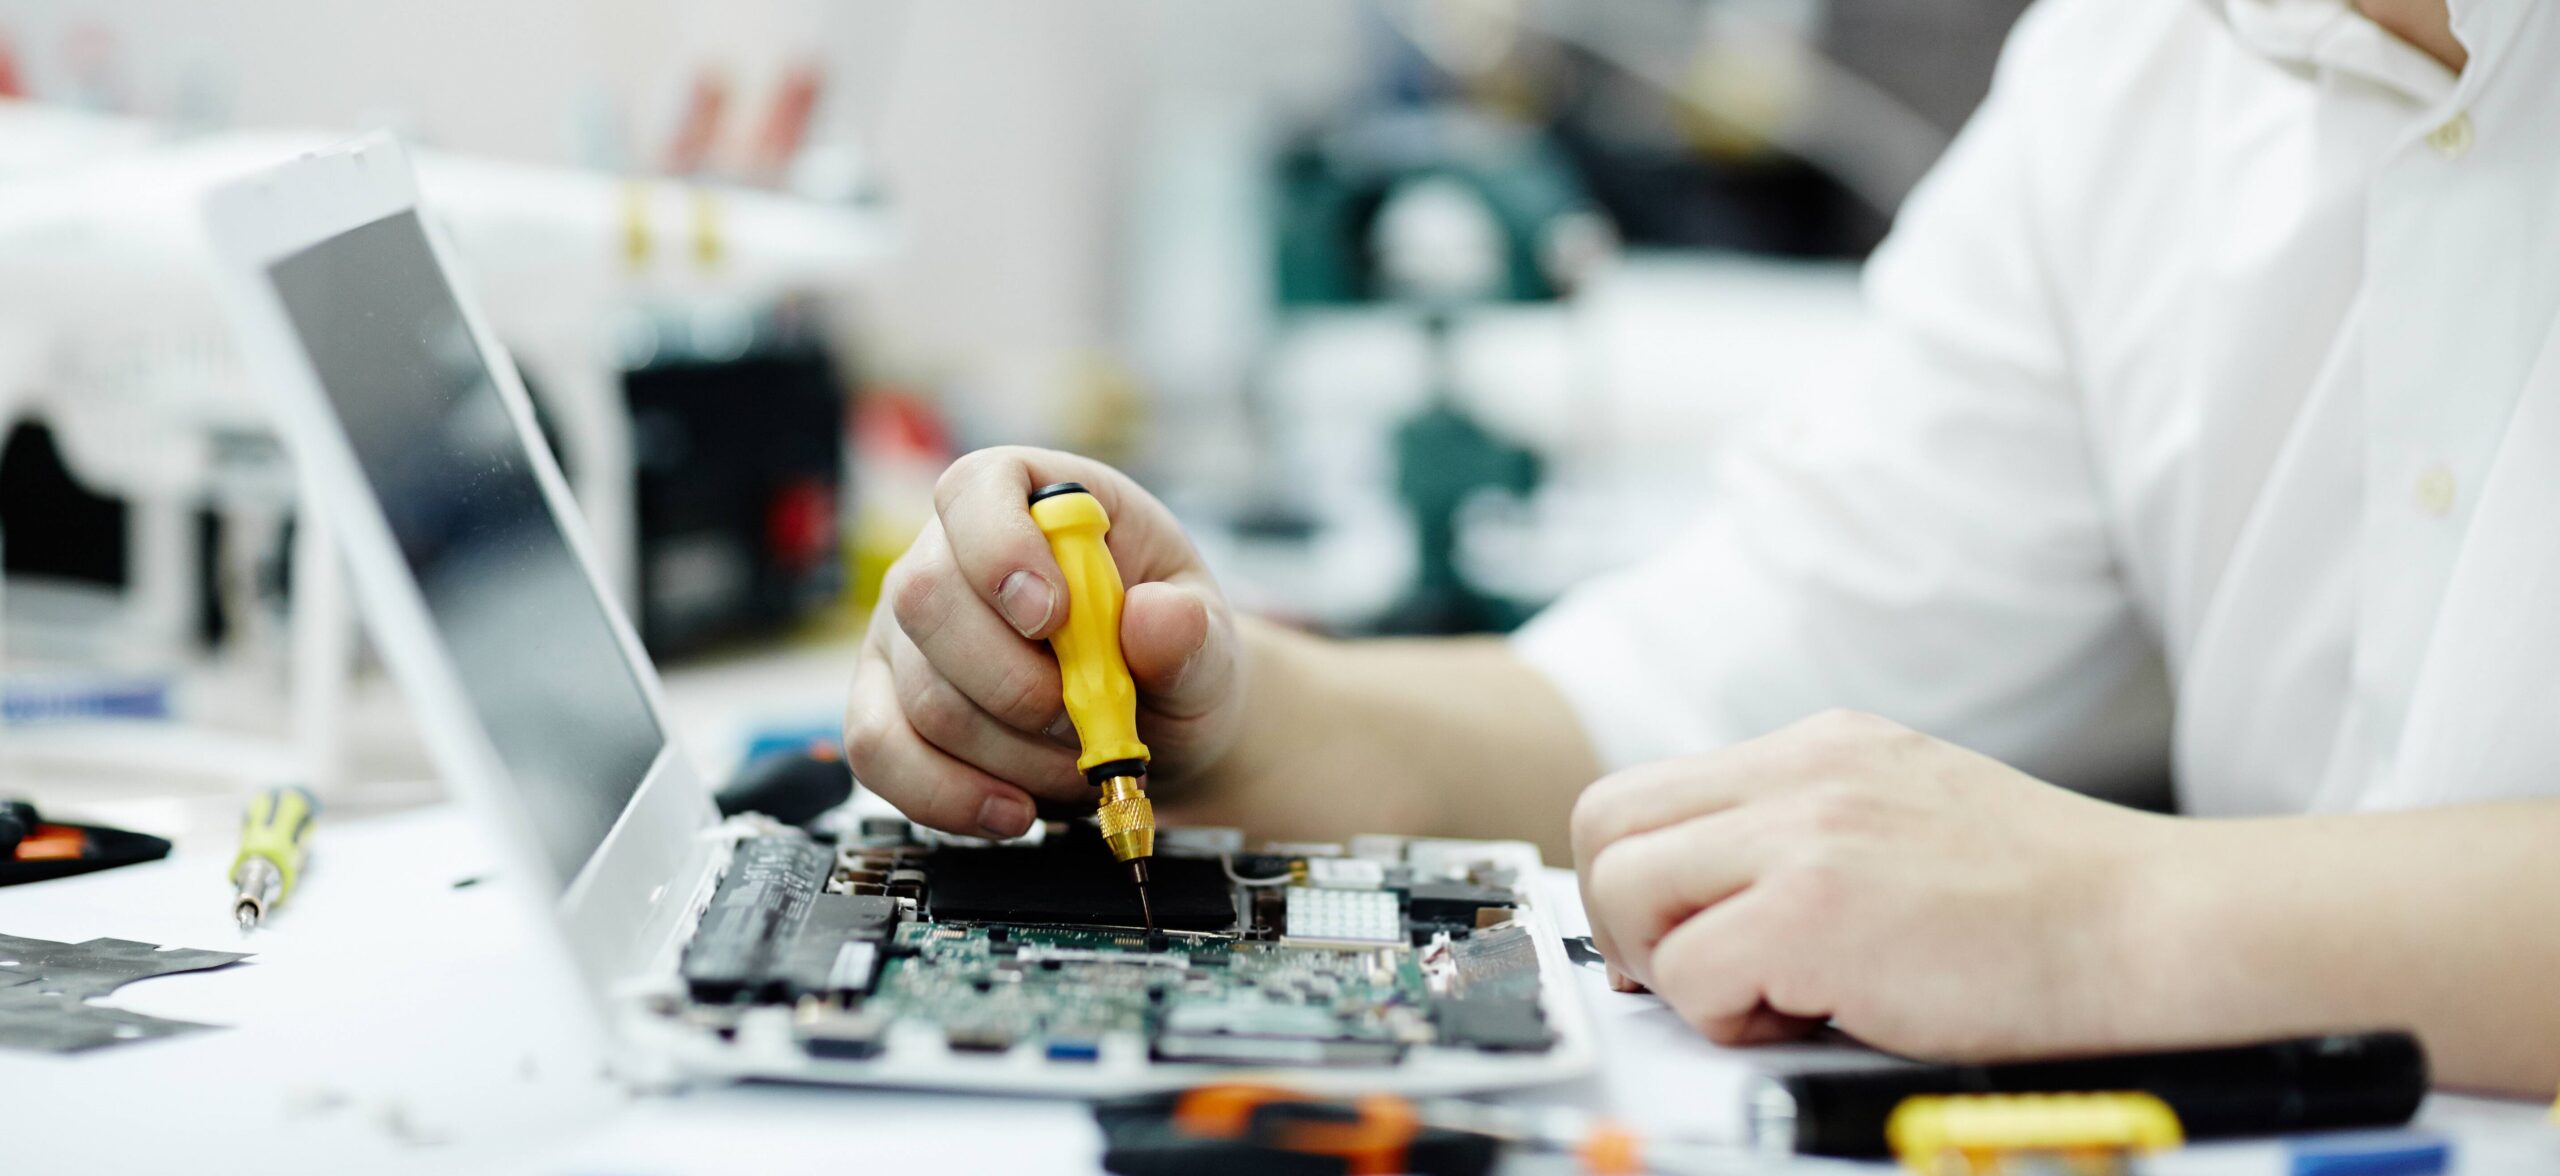 Bostancı Computer Repair and Technical Service